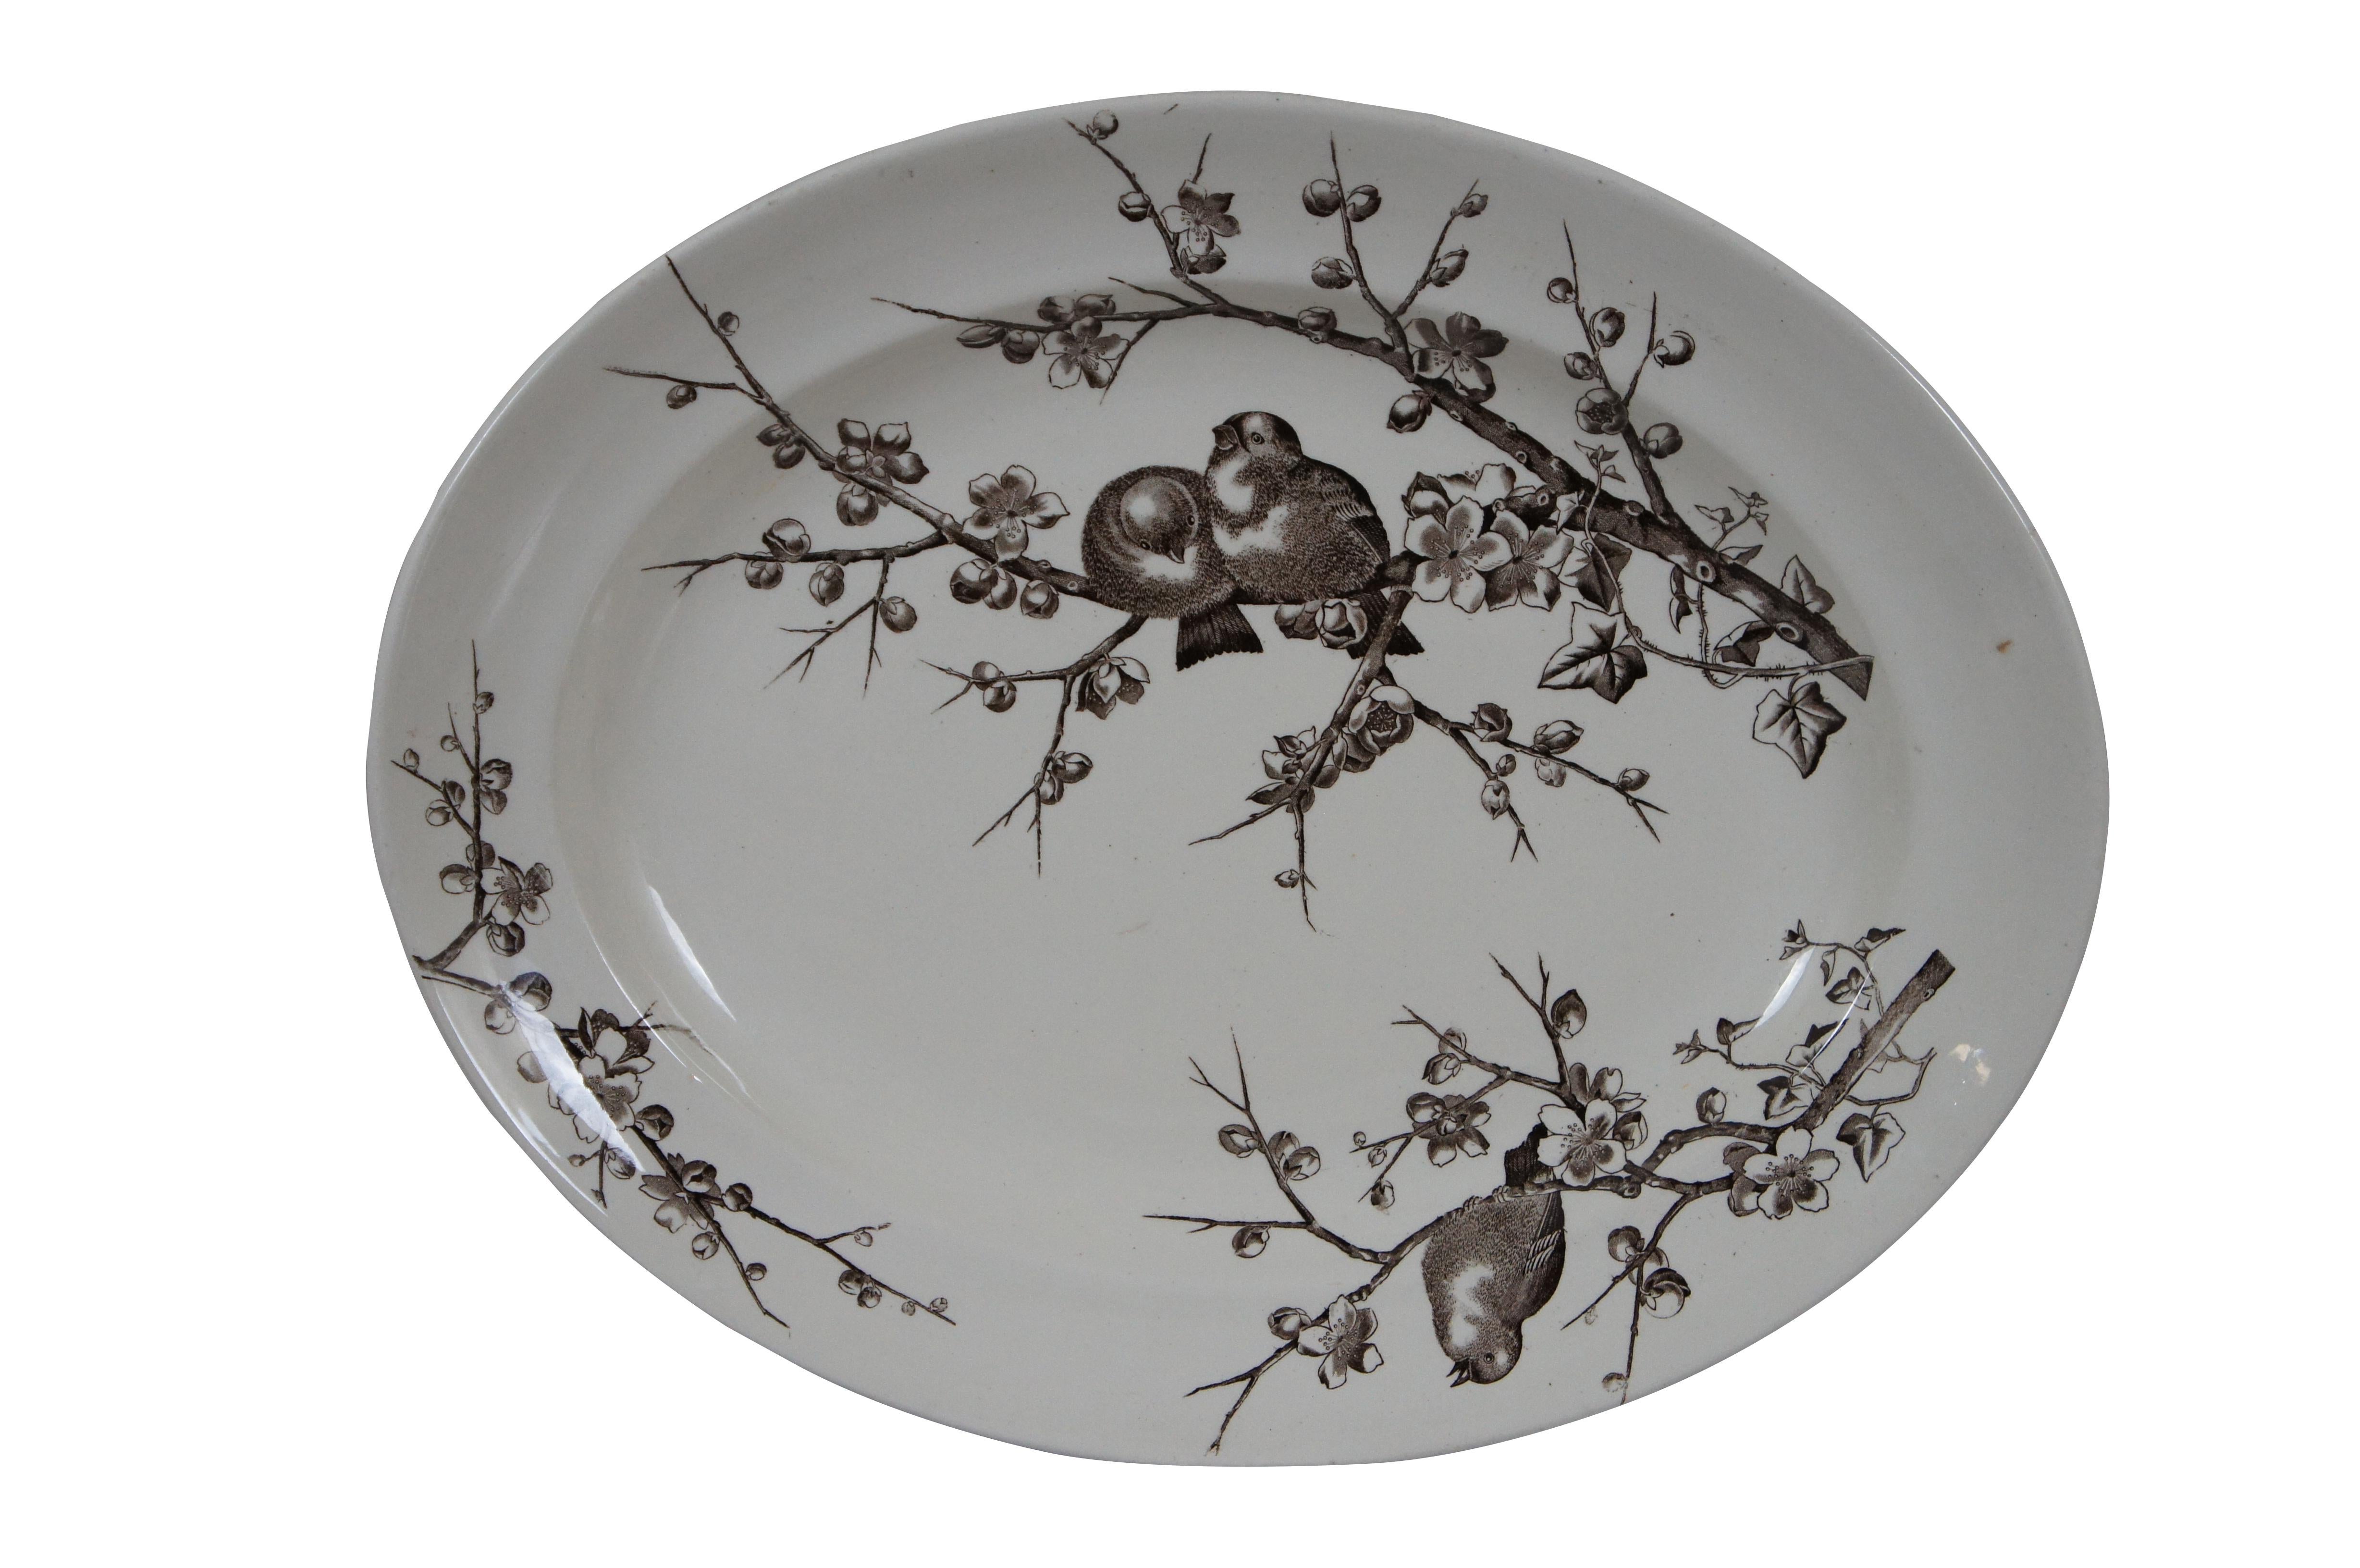 Pair of late 19th century brown transferware ceramic serving platters. One oval platter by George Jones & Sons in the Almonds pattern, showing a pair of birds perched on flowering almond branches. And one round platter by Alfred Meakin in Medway